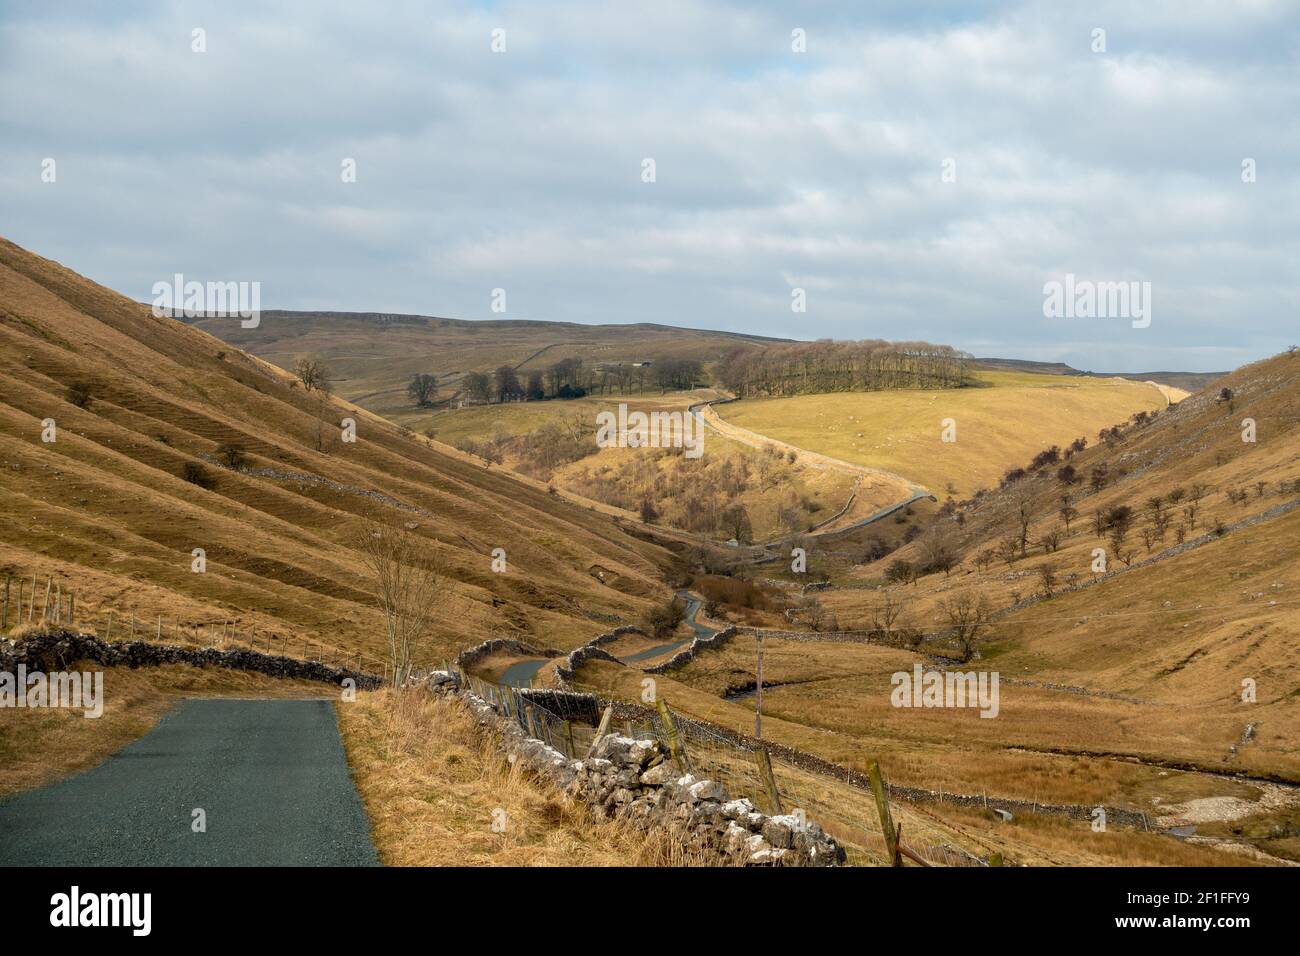 UK cycling landscapes: Cam Gill Road, known by cyclists as Park Rash hill climb, steep country lane from Kettlewell, Wharfedale, Yorkshire Dales Stock Photo